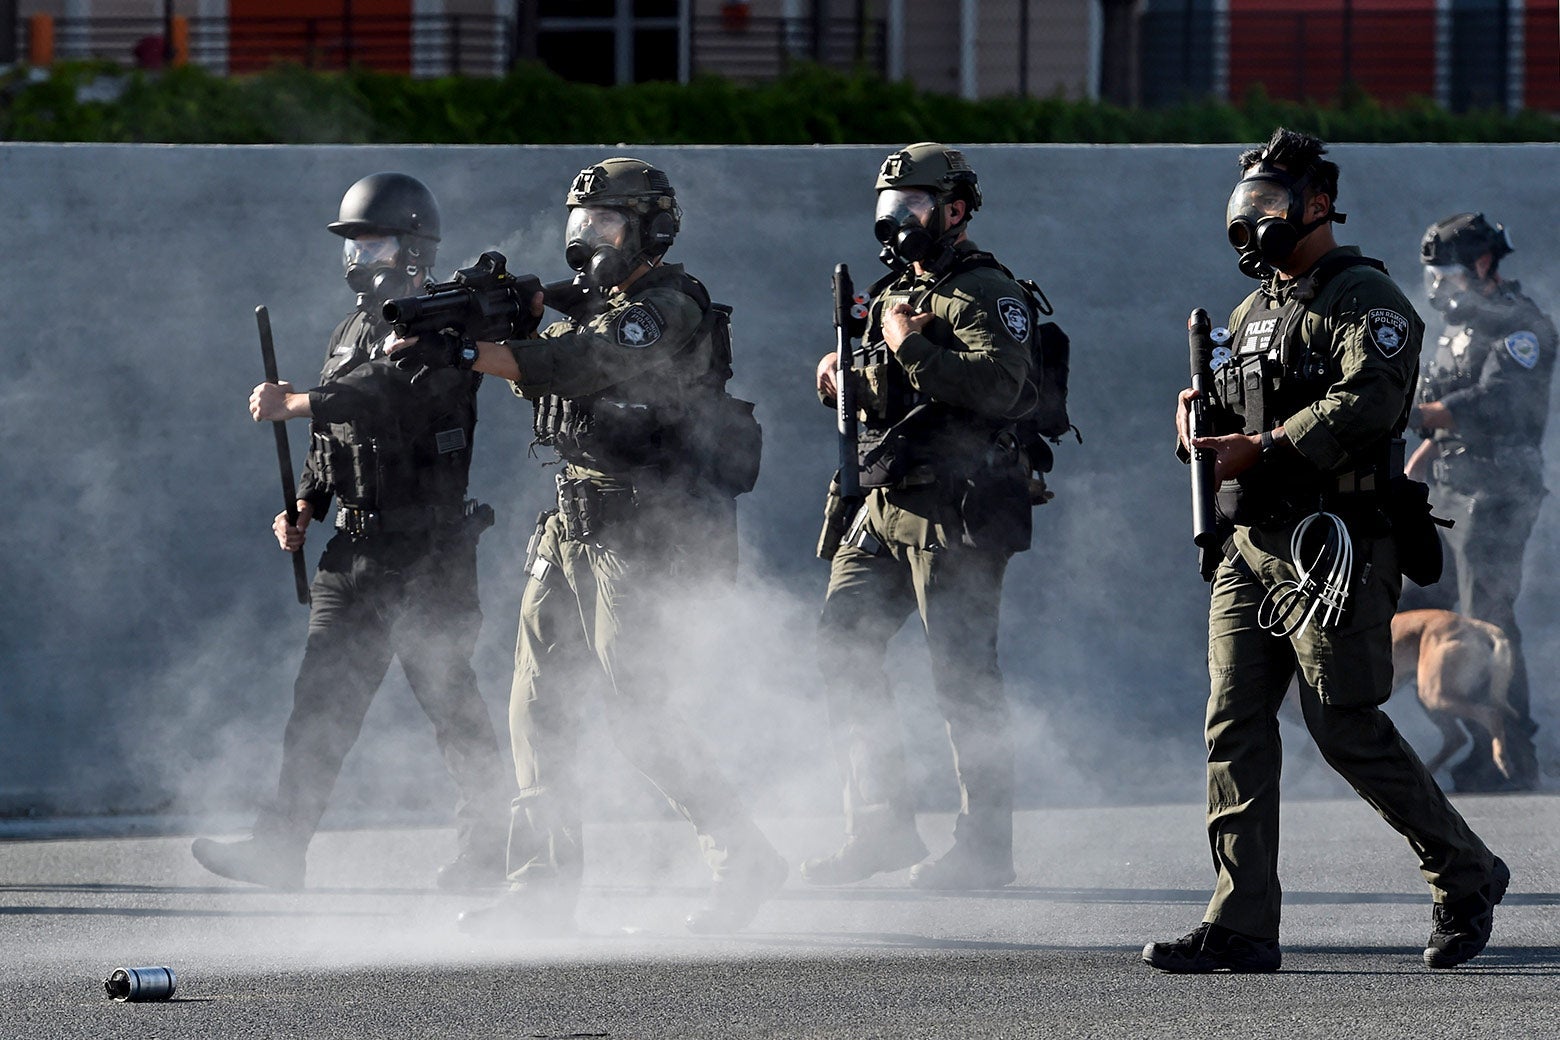 Police in tactical gear carry guns and throw tear-gas canisters.